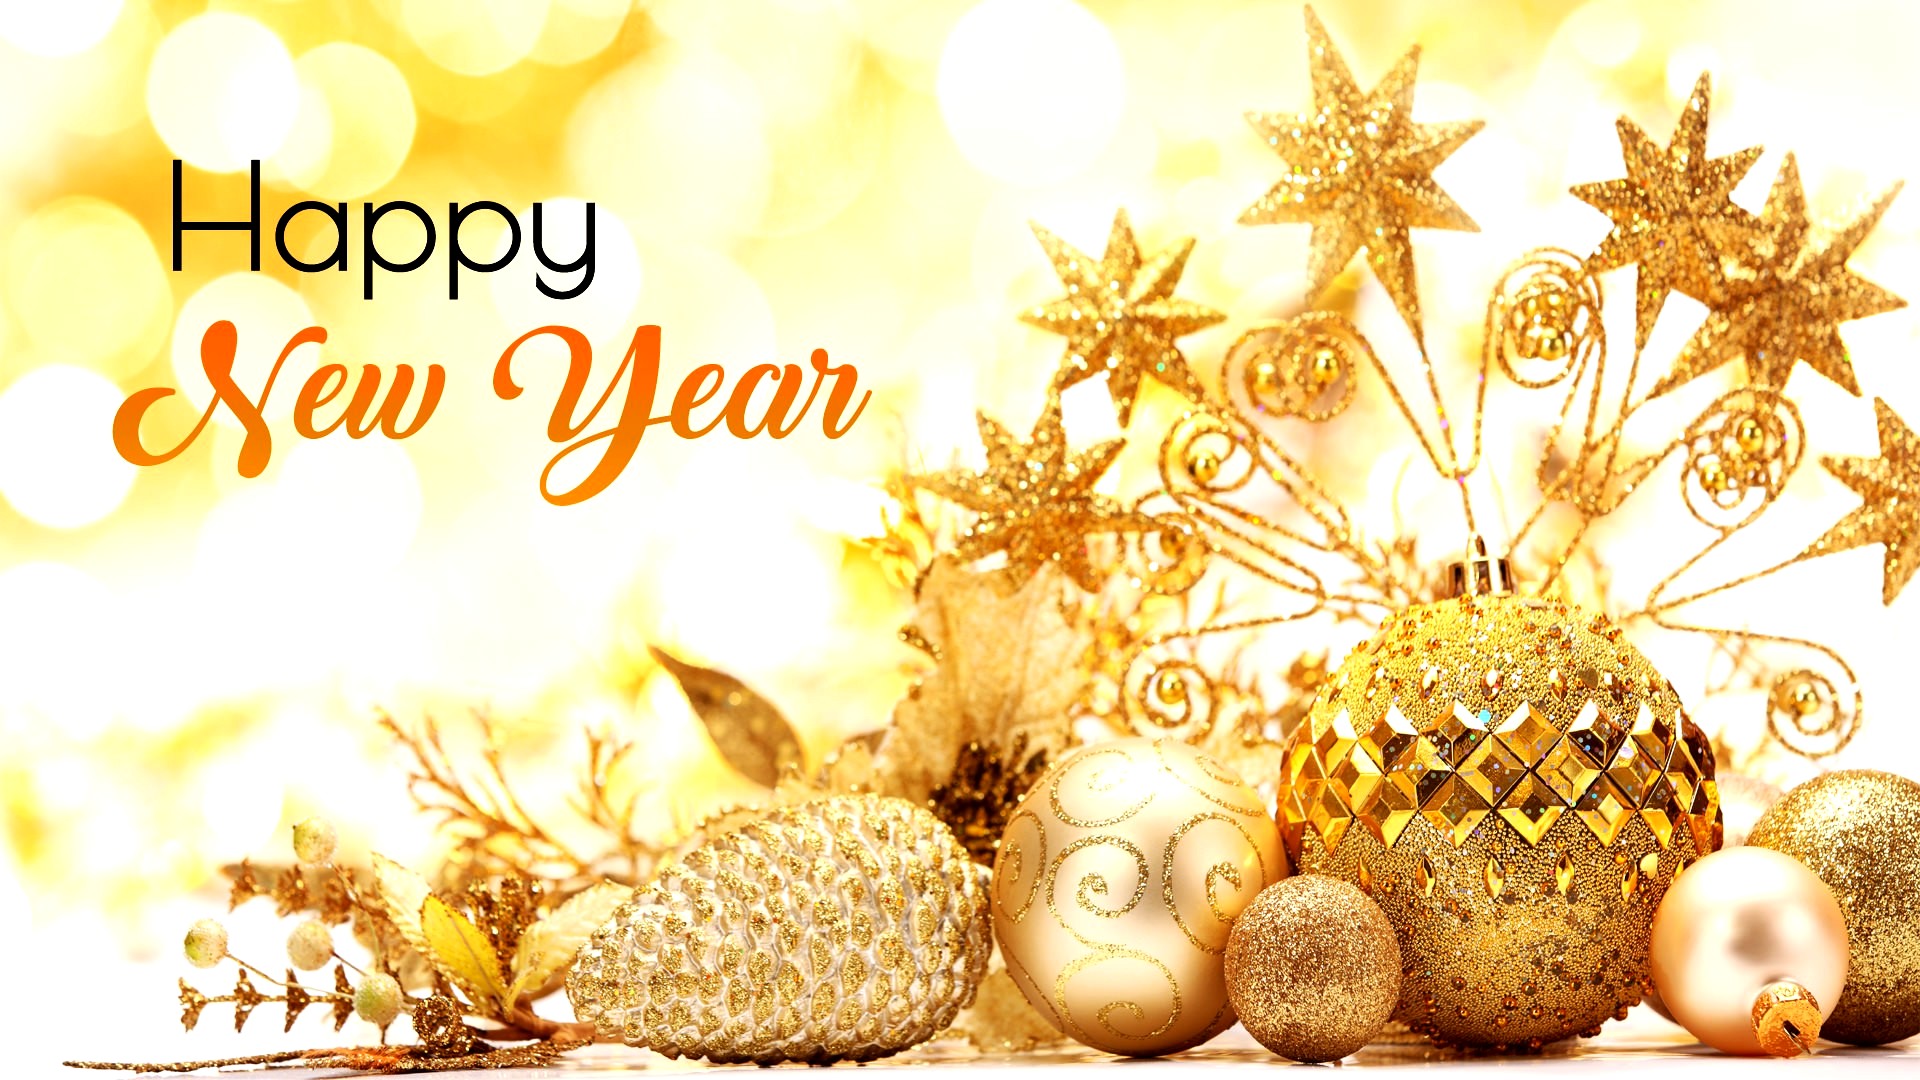 Happy New Year Desktop Screensavers with high-resolution 1920x1080 pixel. You can use and set as wallpaper for Notebook Screensavers, Mac Wallpapers, Mobile Home Screen, iPhone or Android Phones Lock Screen